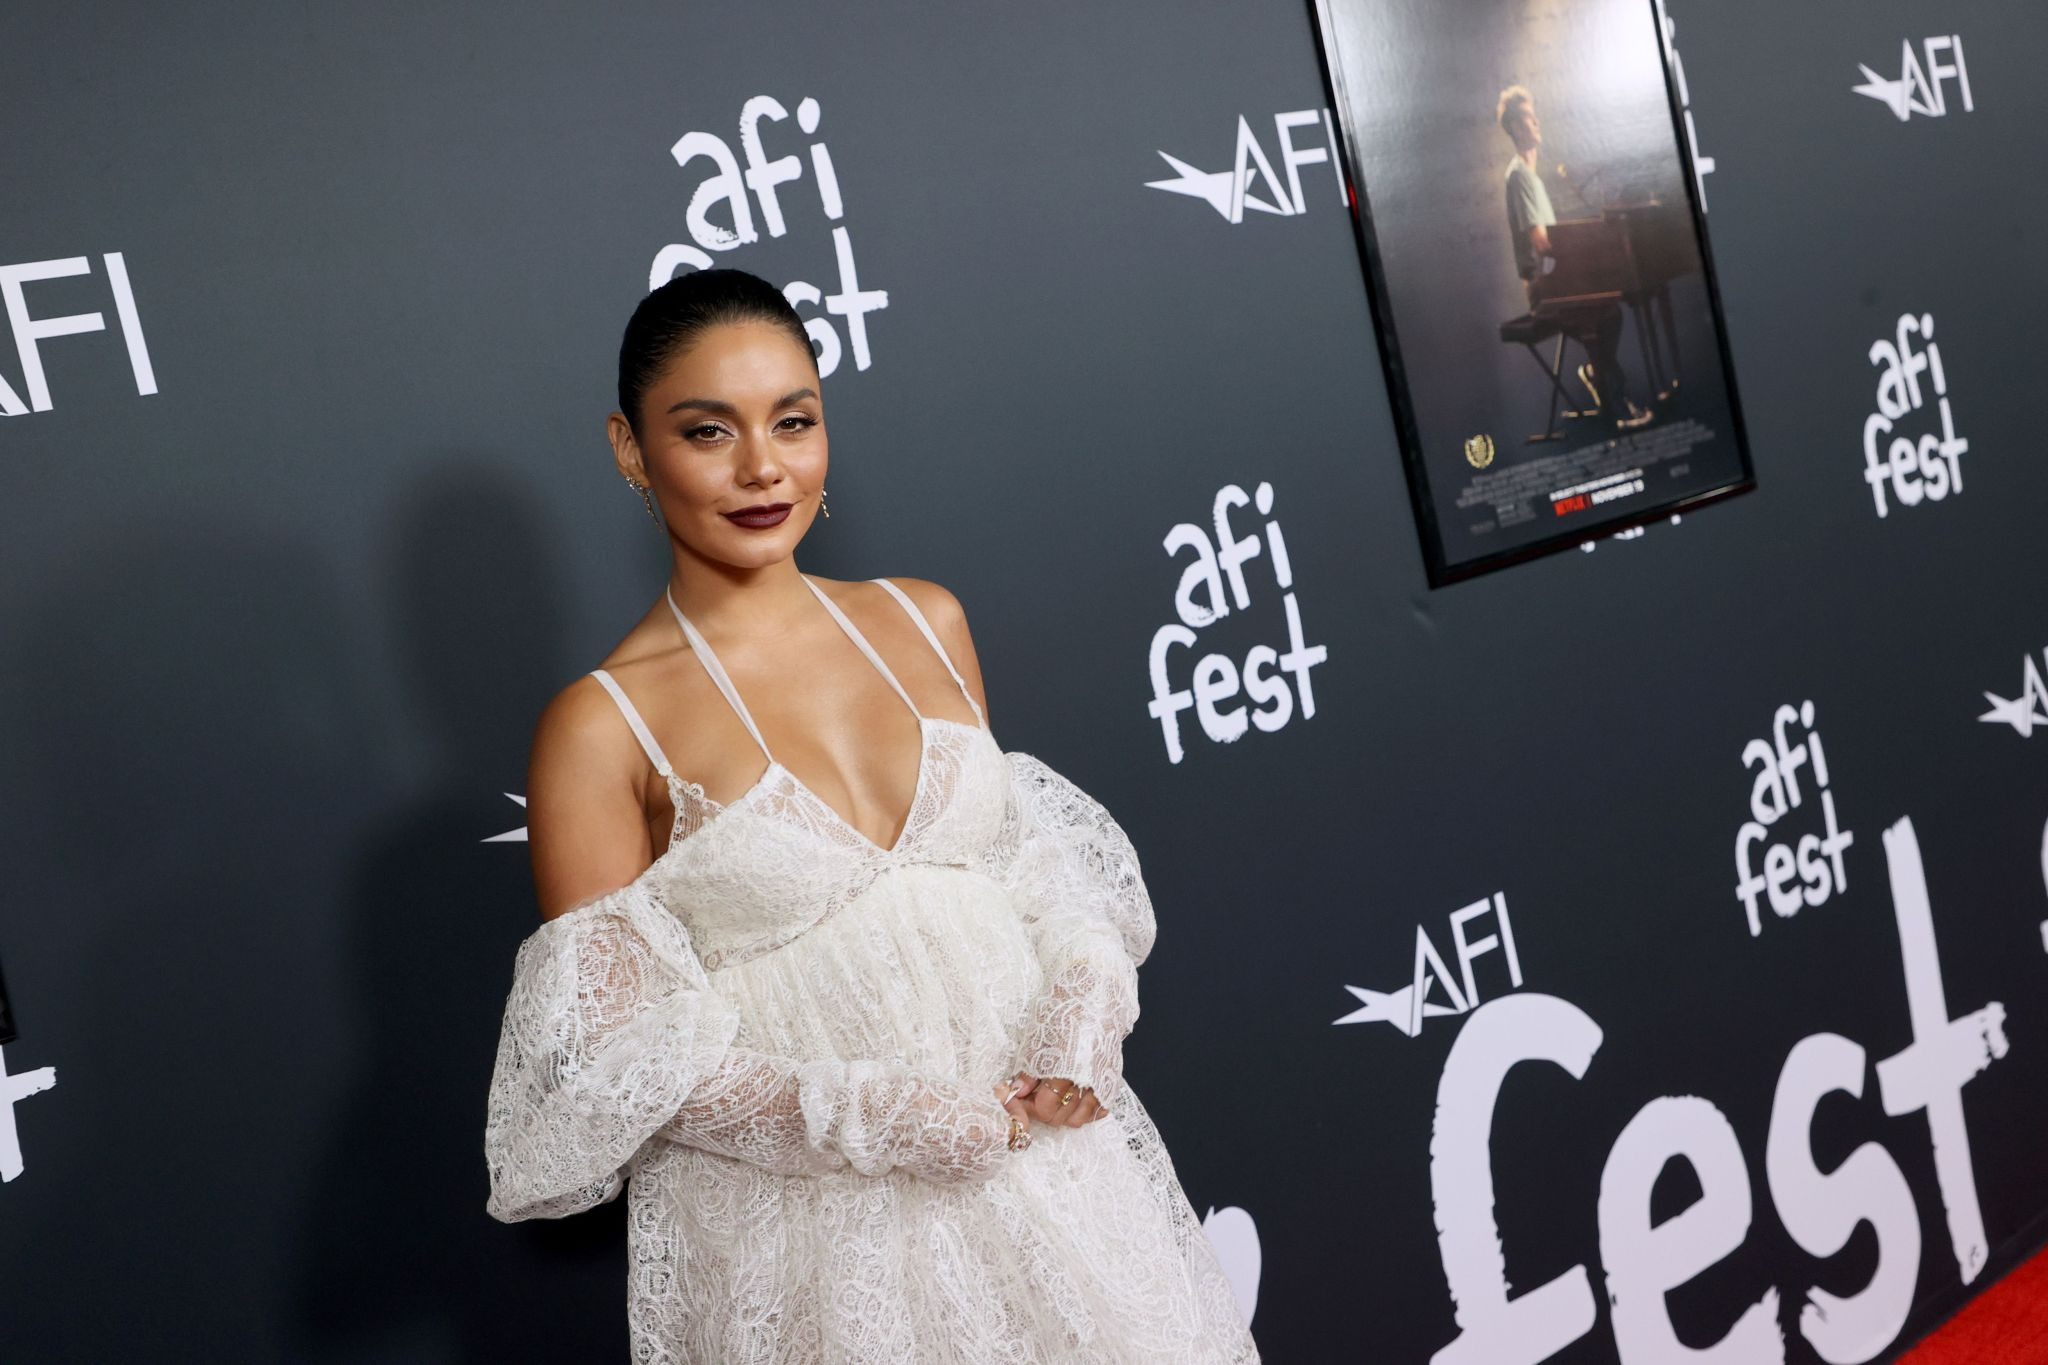 Vanessa Hudgens - attends the 2021 AFI Fest Opening Night Gala Premiere of Netflix's "tick, tick…BOOM" in Hollywood, California Nov 10, 2021